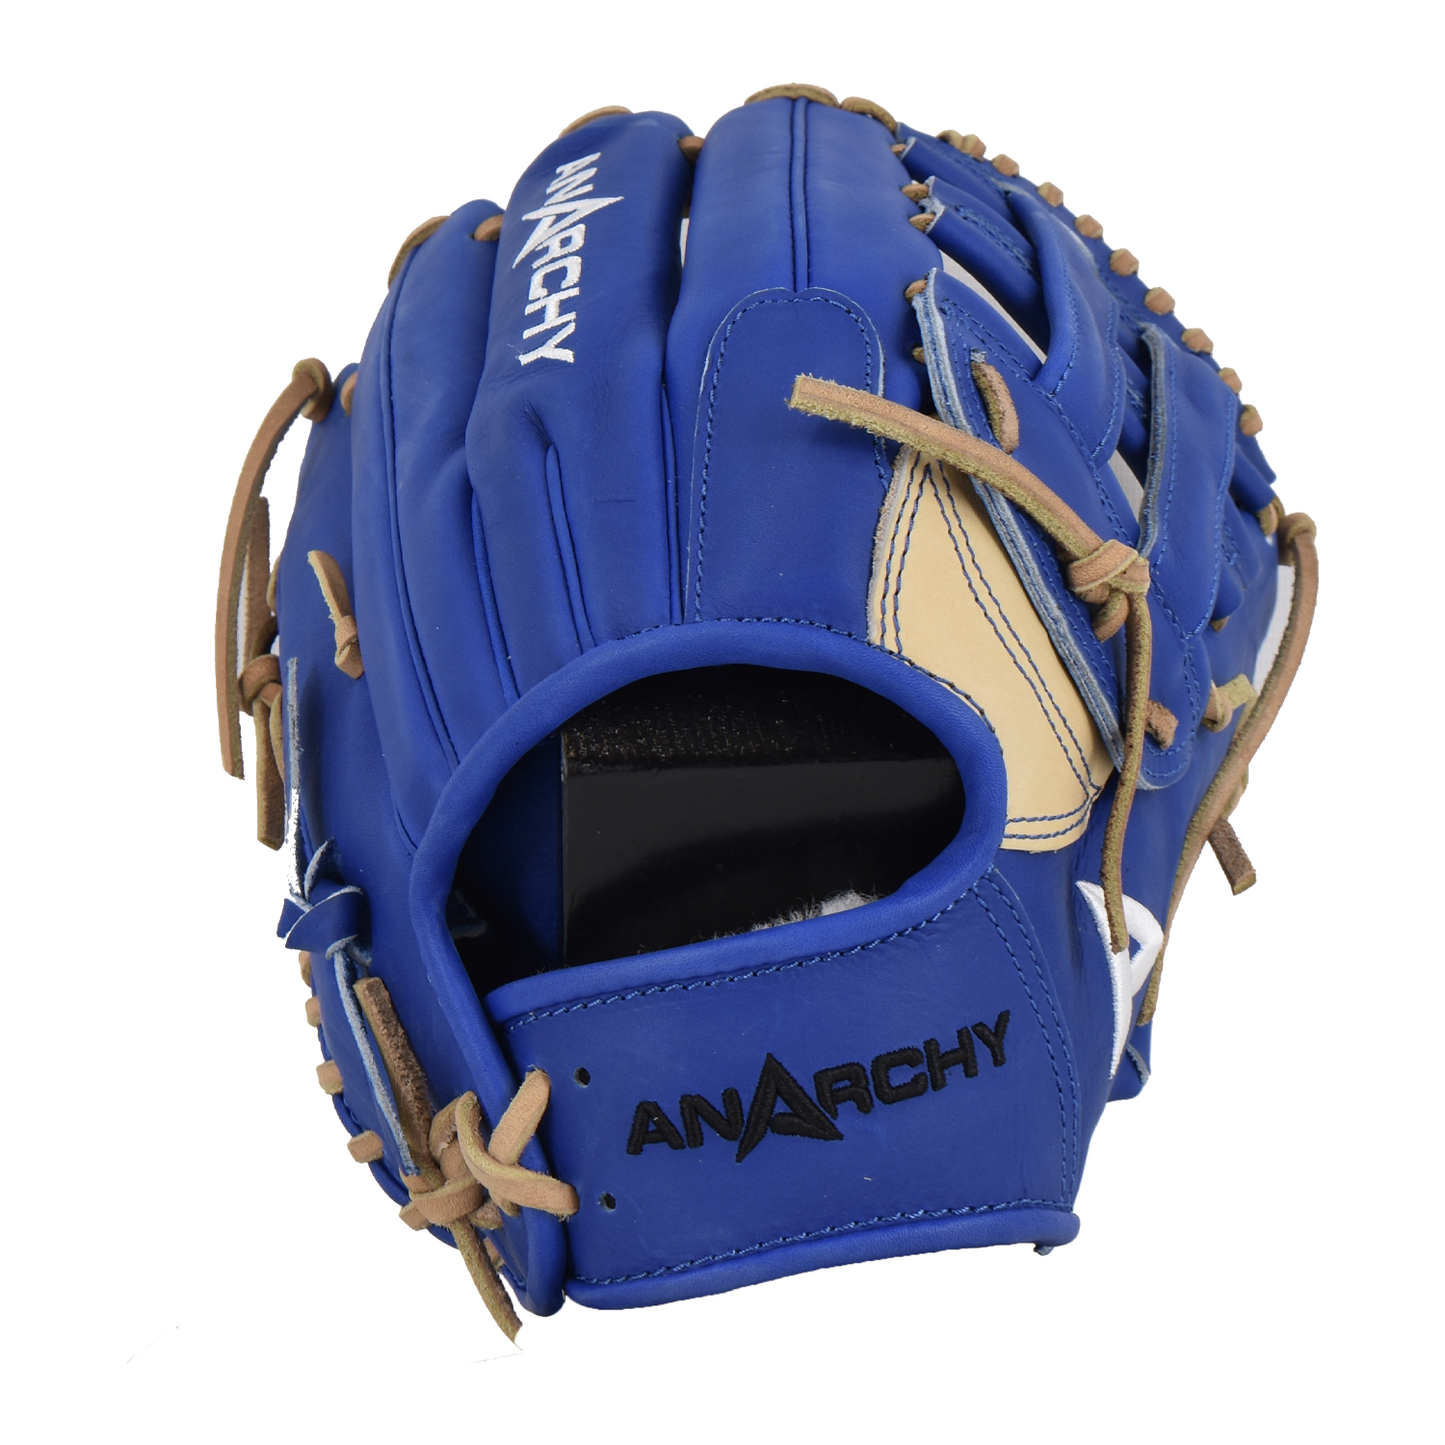 Viper Premium Leather Slowpitch Softball Fielding Glove  Anarchy Edition - VIP-H-RB-CR-006